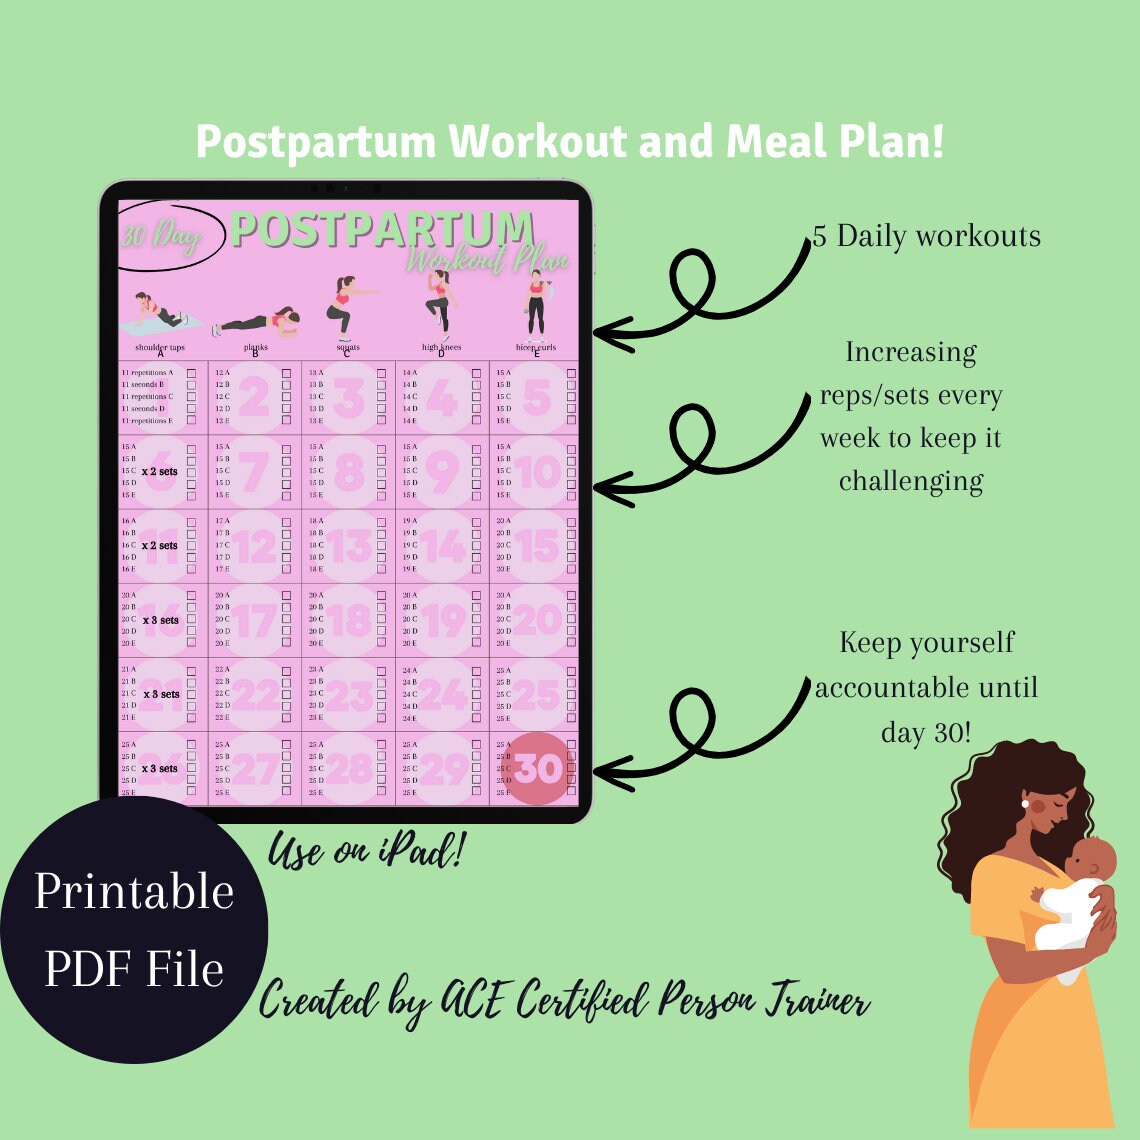 Mother's Postpartum Workout Guide AND Meal Plan How to Stay Fit After Baby  Stay at Home Mom Fitness Routine How to Lose Weight After Baby 